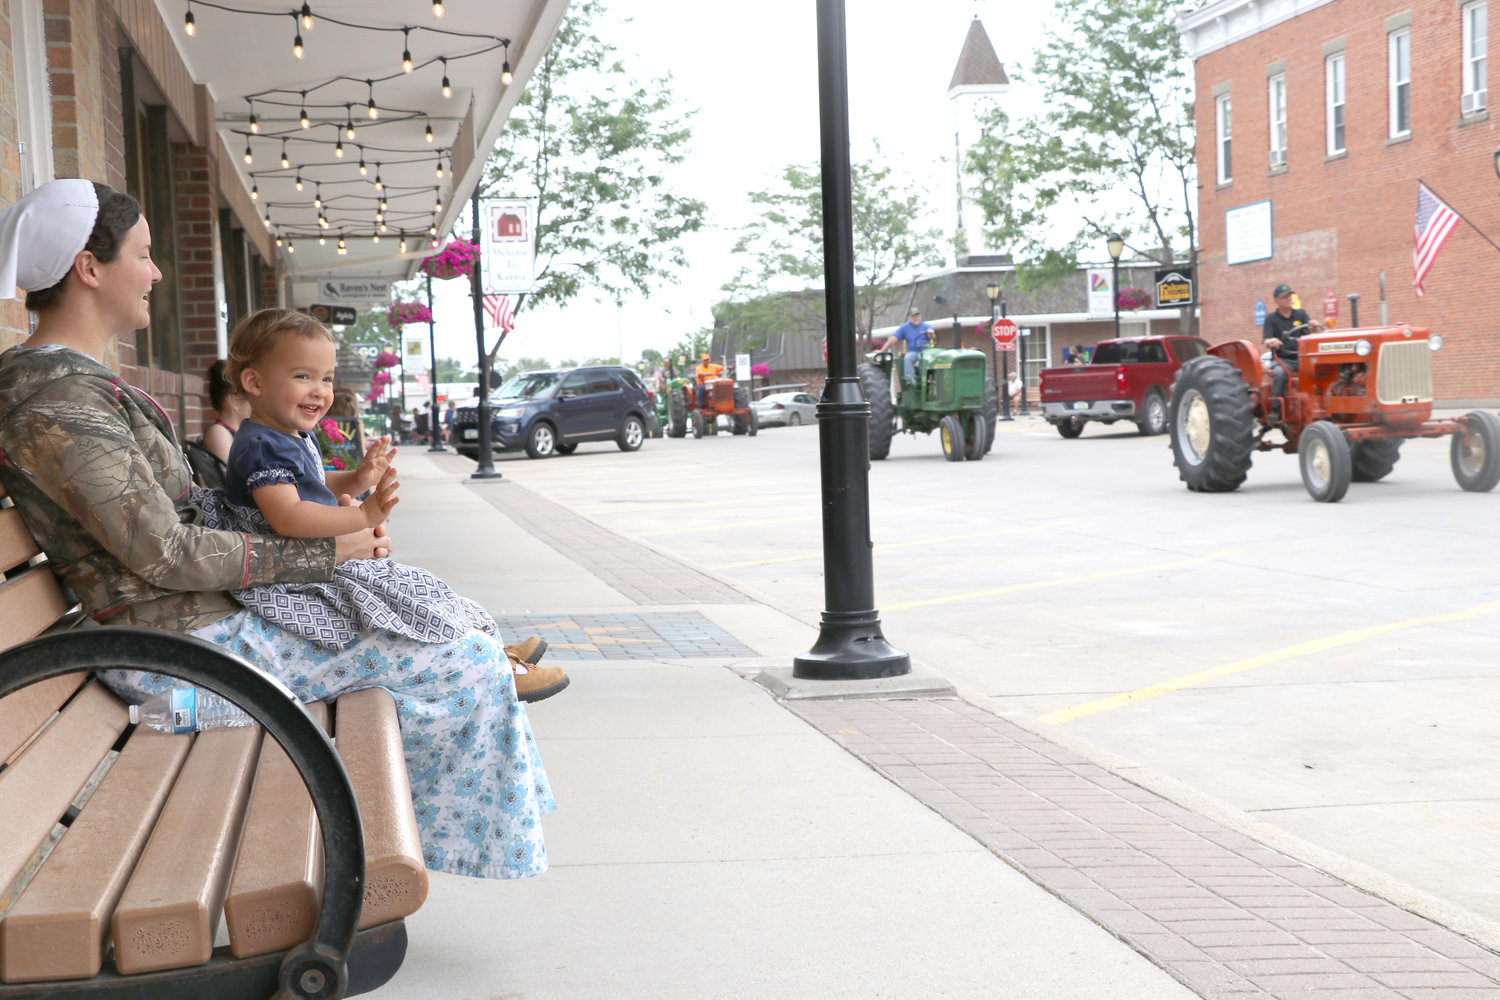 Morgan, who is almost two years old, waves to tractors with her mom, Dianne in downtown Kalona.